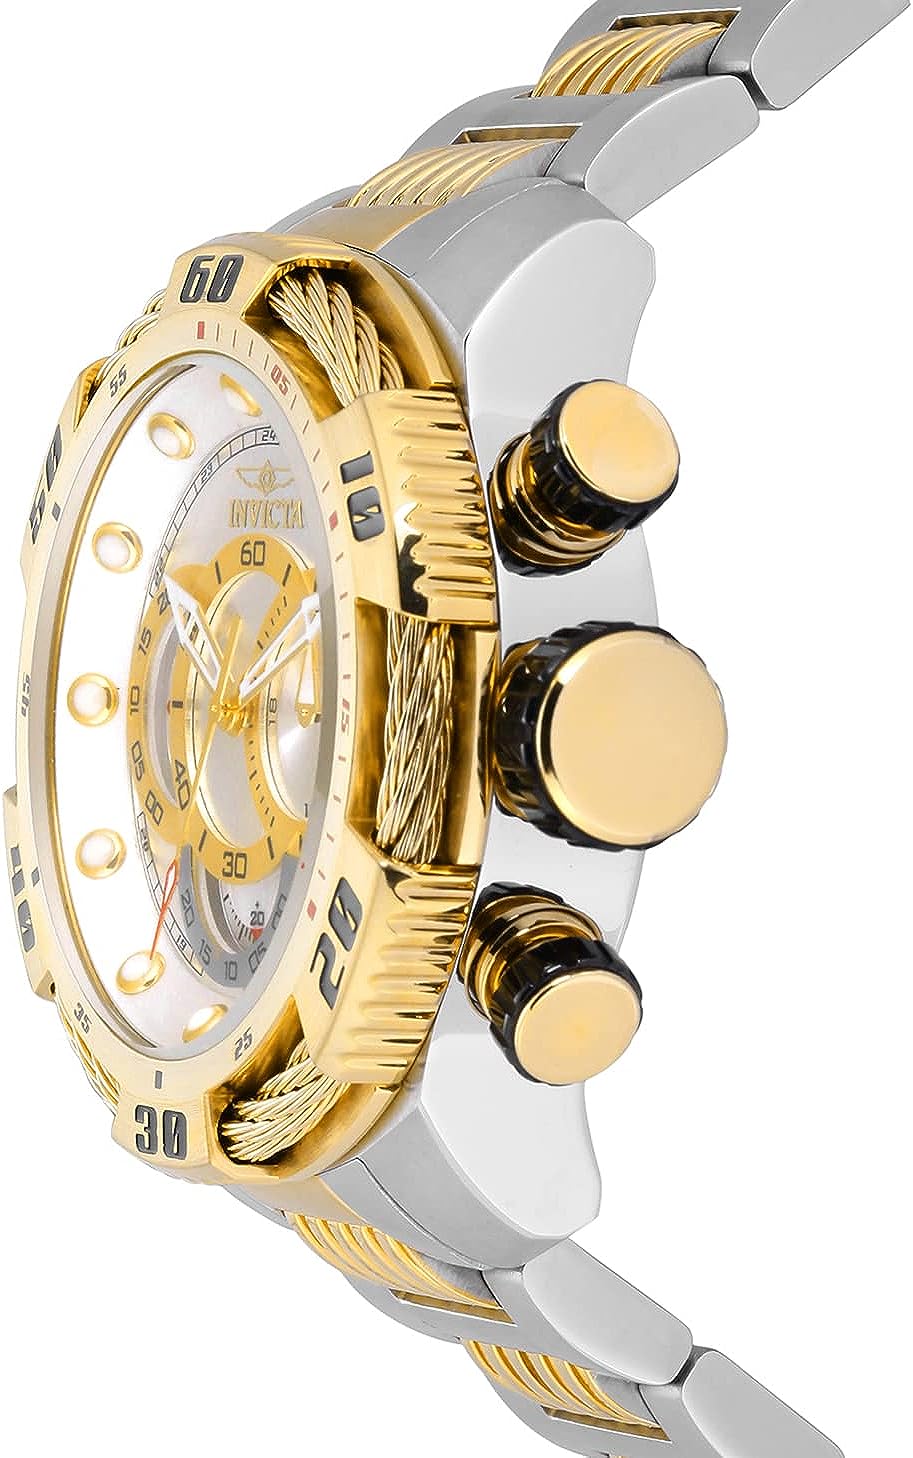 SPECIAL Invicta Men's 25480 Speedway Analog Display Quartz Two Tone Watch, Gold/Stainless Steel